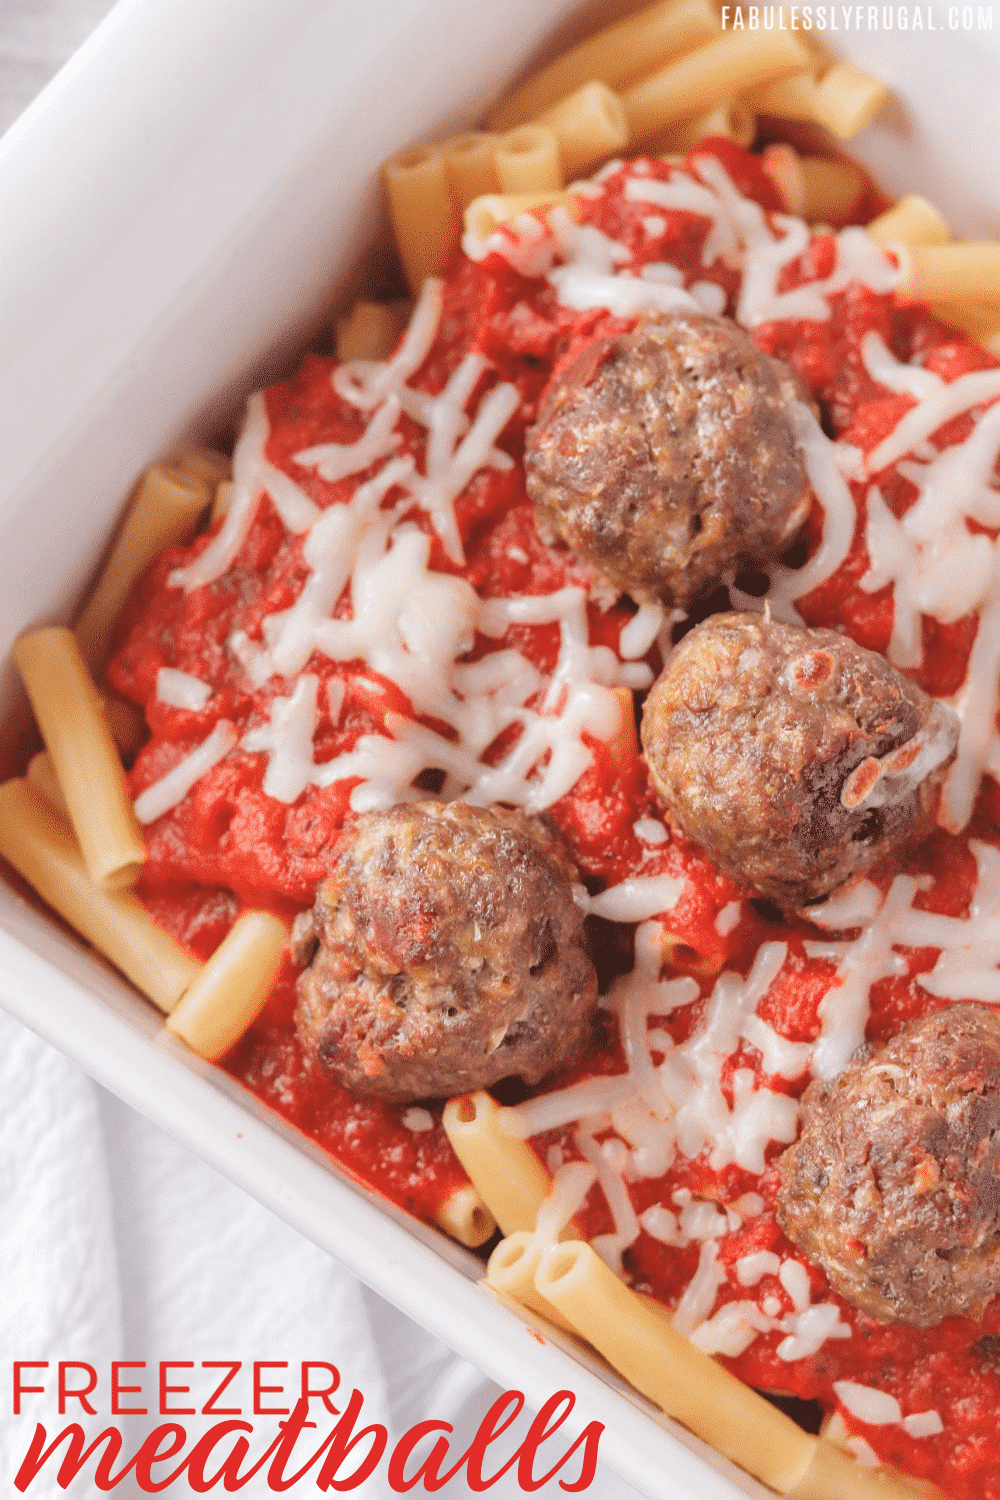 Homemade meatballs with pasta